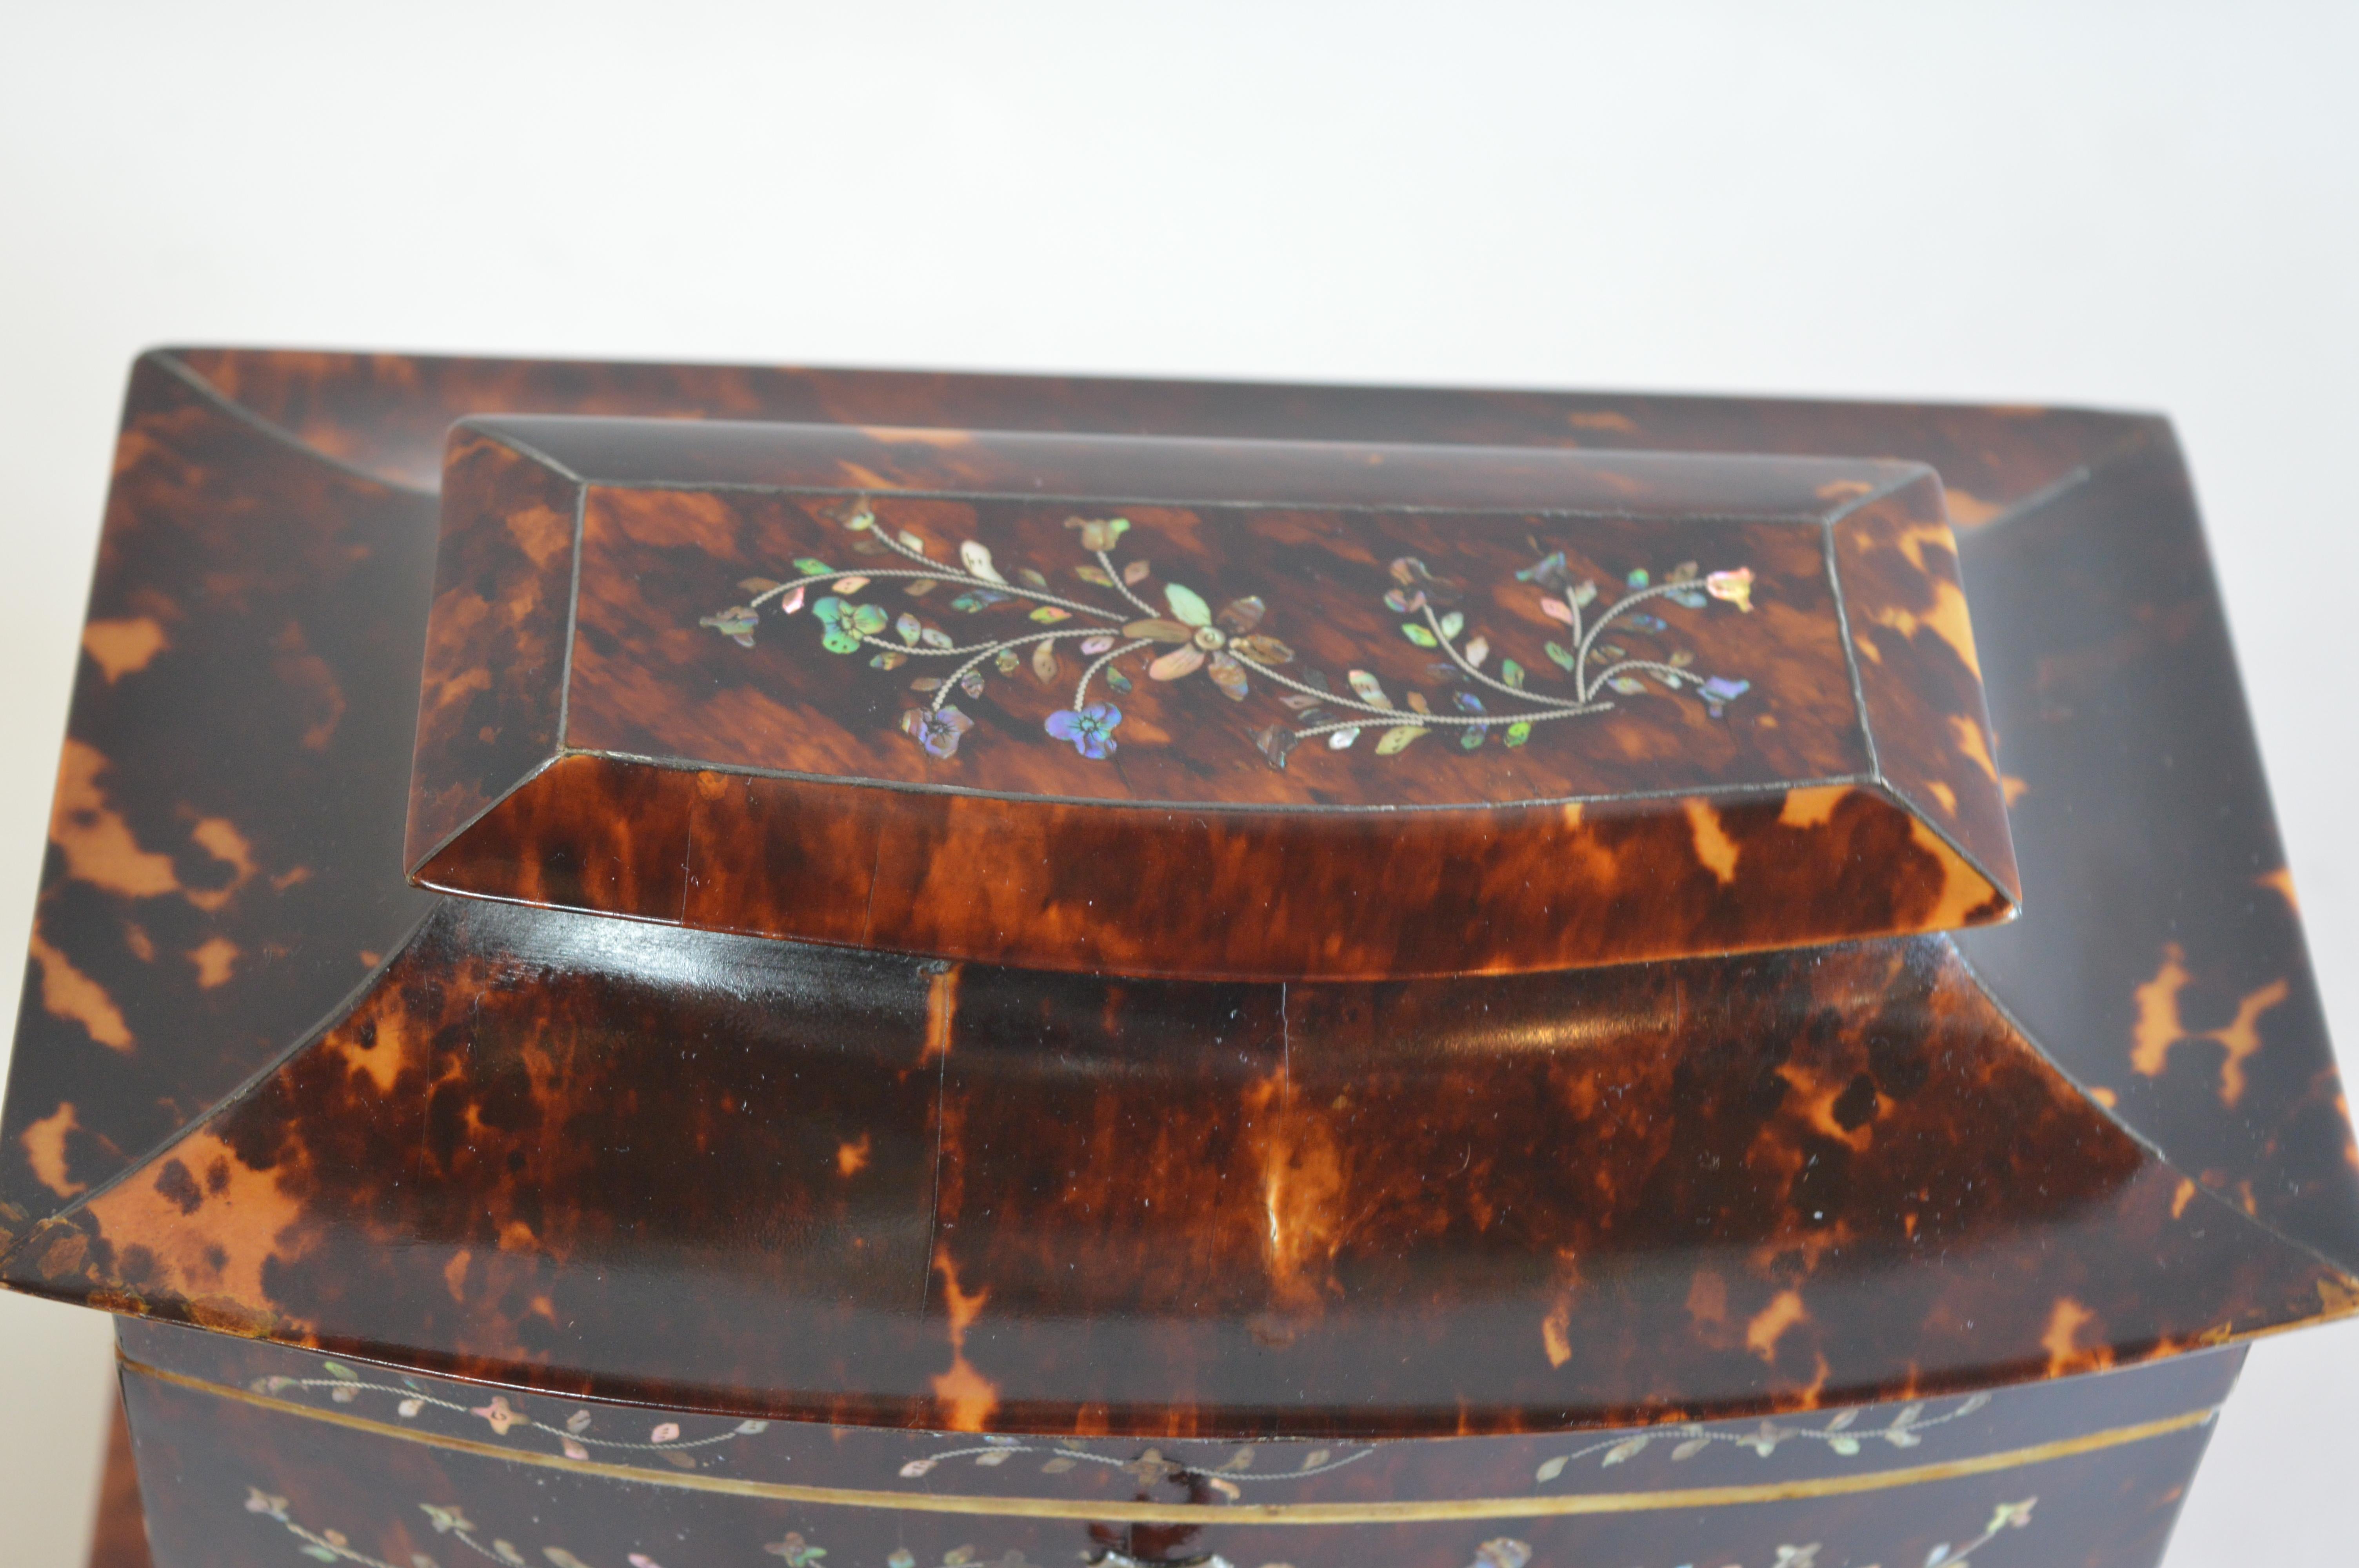 19th century tortoiseshell and mother of pearl floral inlaid tea caddy.